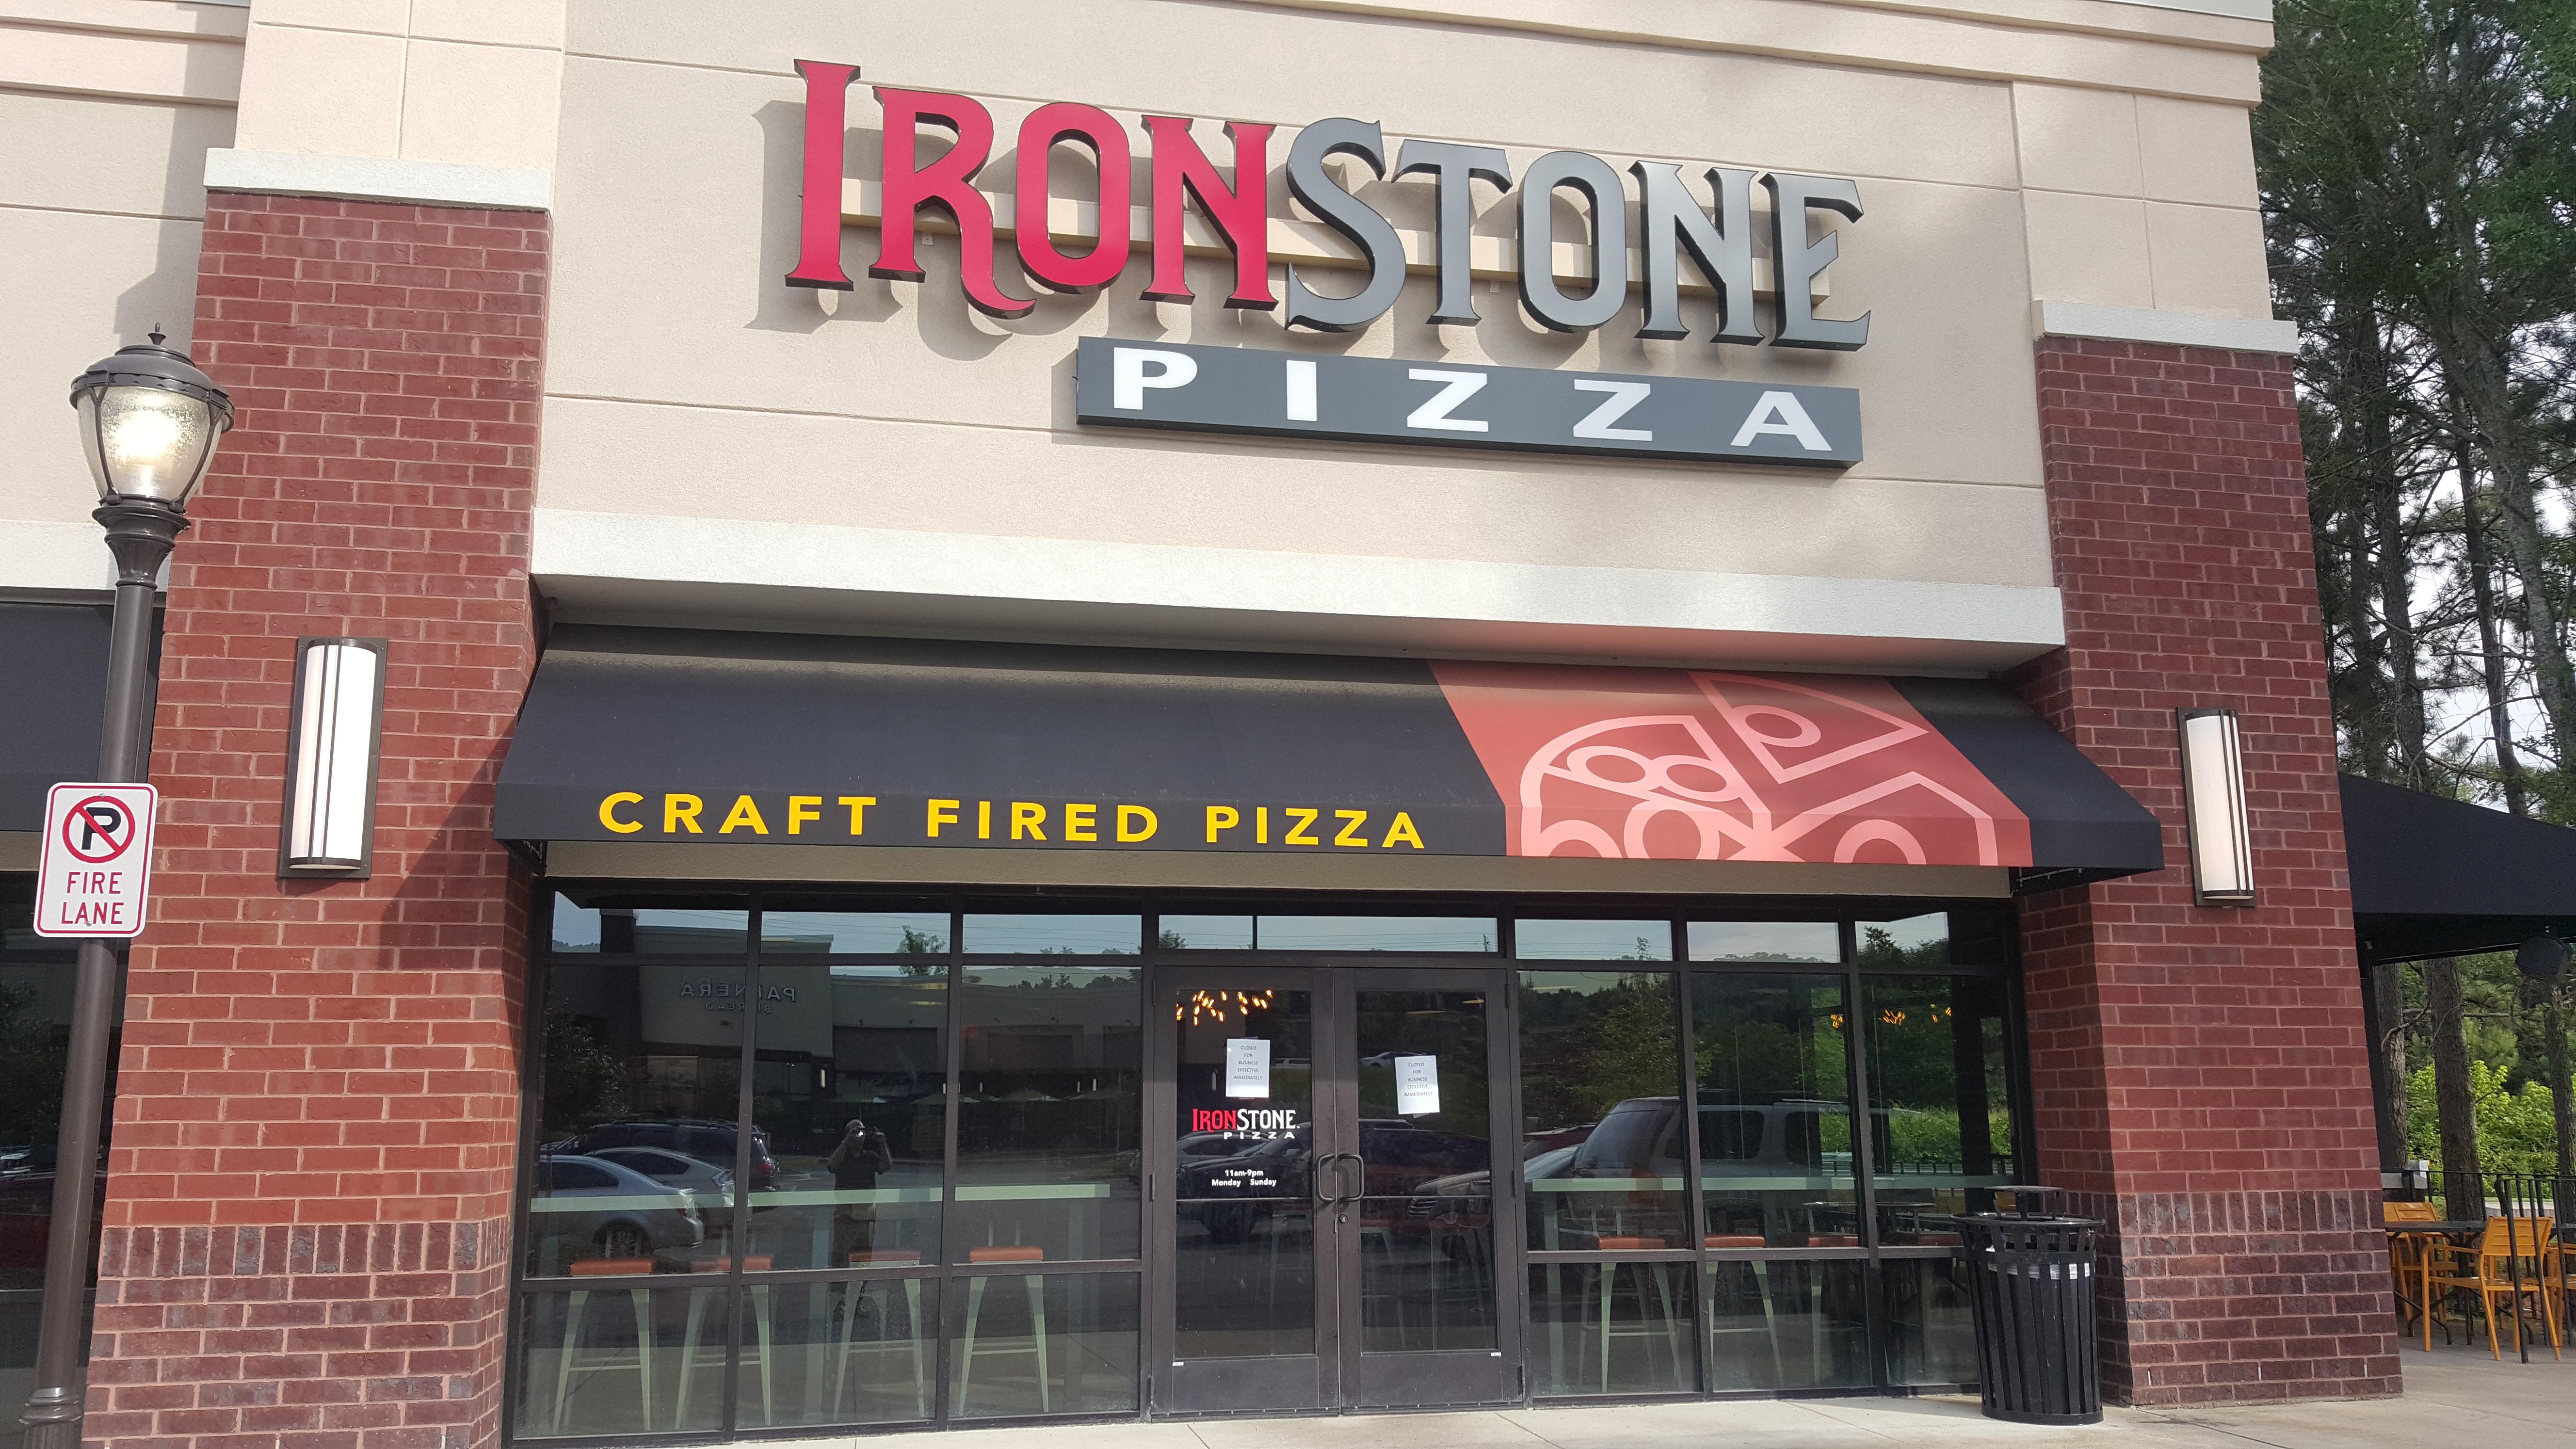 Kemp's Kitchen owners acquired Ironstone Pizza in Trussville, opened new restaurant in Birmingham